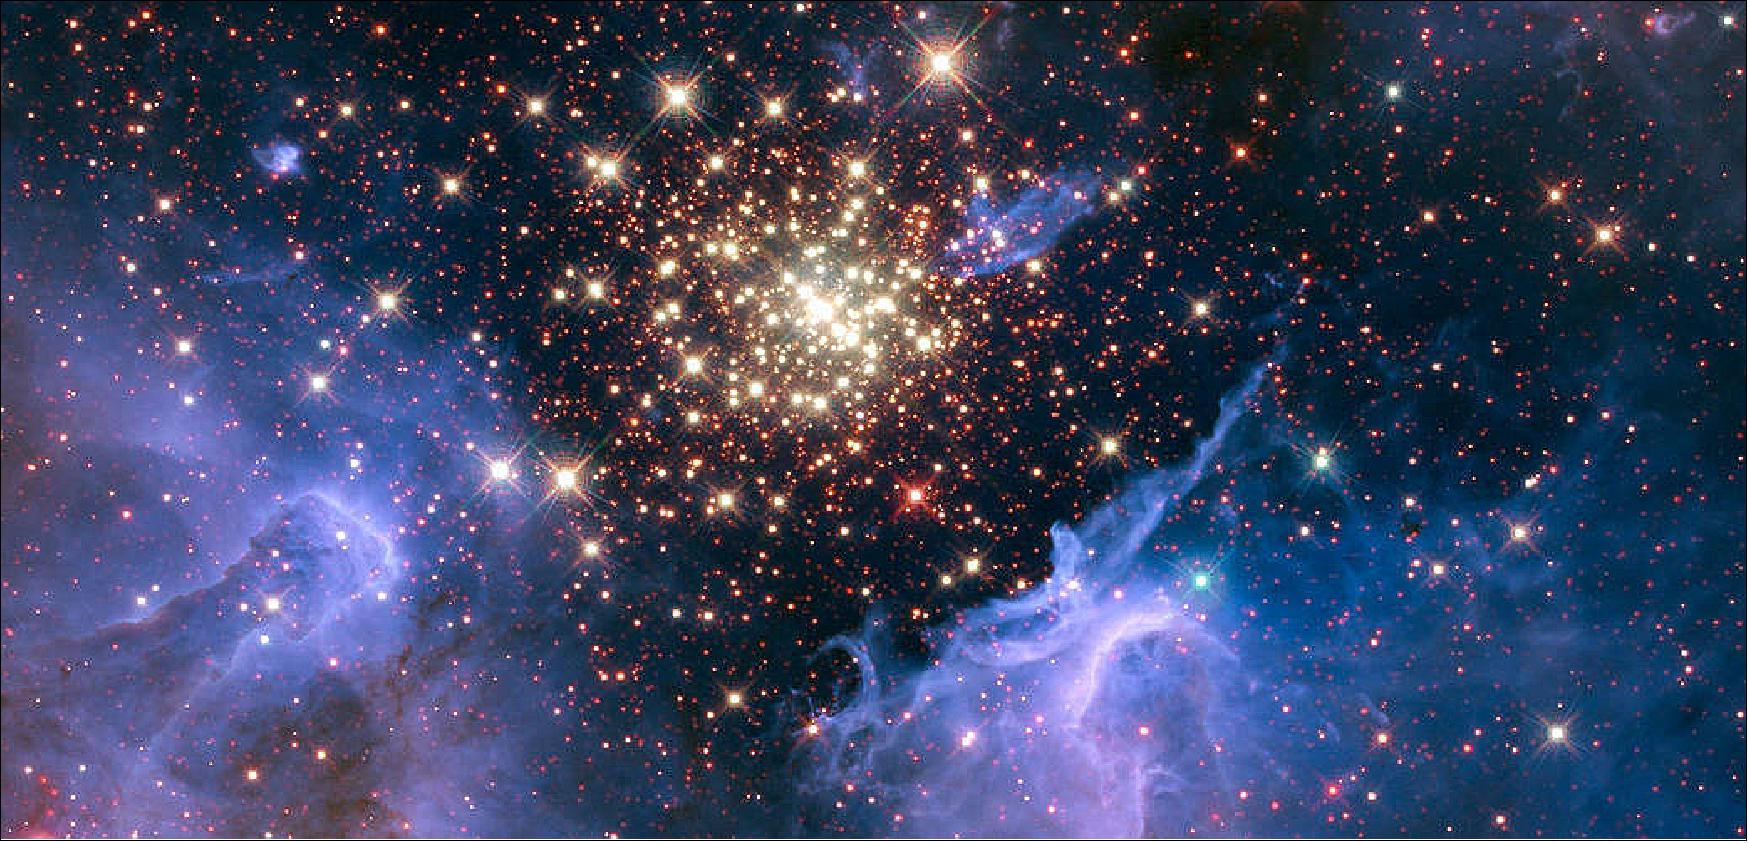 Figure 31: This Hubble Space Telescope image was captured in August 2009 and December 2009 with the Wide Field Camera 3 in both visible and infrared light, which trace the glow of sulfur, hydrogen, and iron [image credit: NASA, ESA, R. O'Connell (University of Virginia), F. Paresce (National Institute for Astrophysics, Bologna, Italy), E. Young (Universities Space Research Association/Ames Research Center), the WFC3 Science Oversight Committee, and the Hubble Heritage Team (STScI/AURA)]